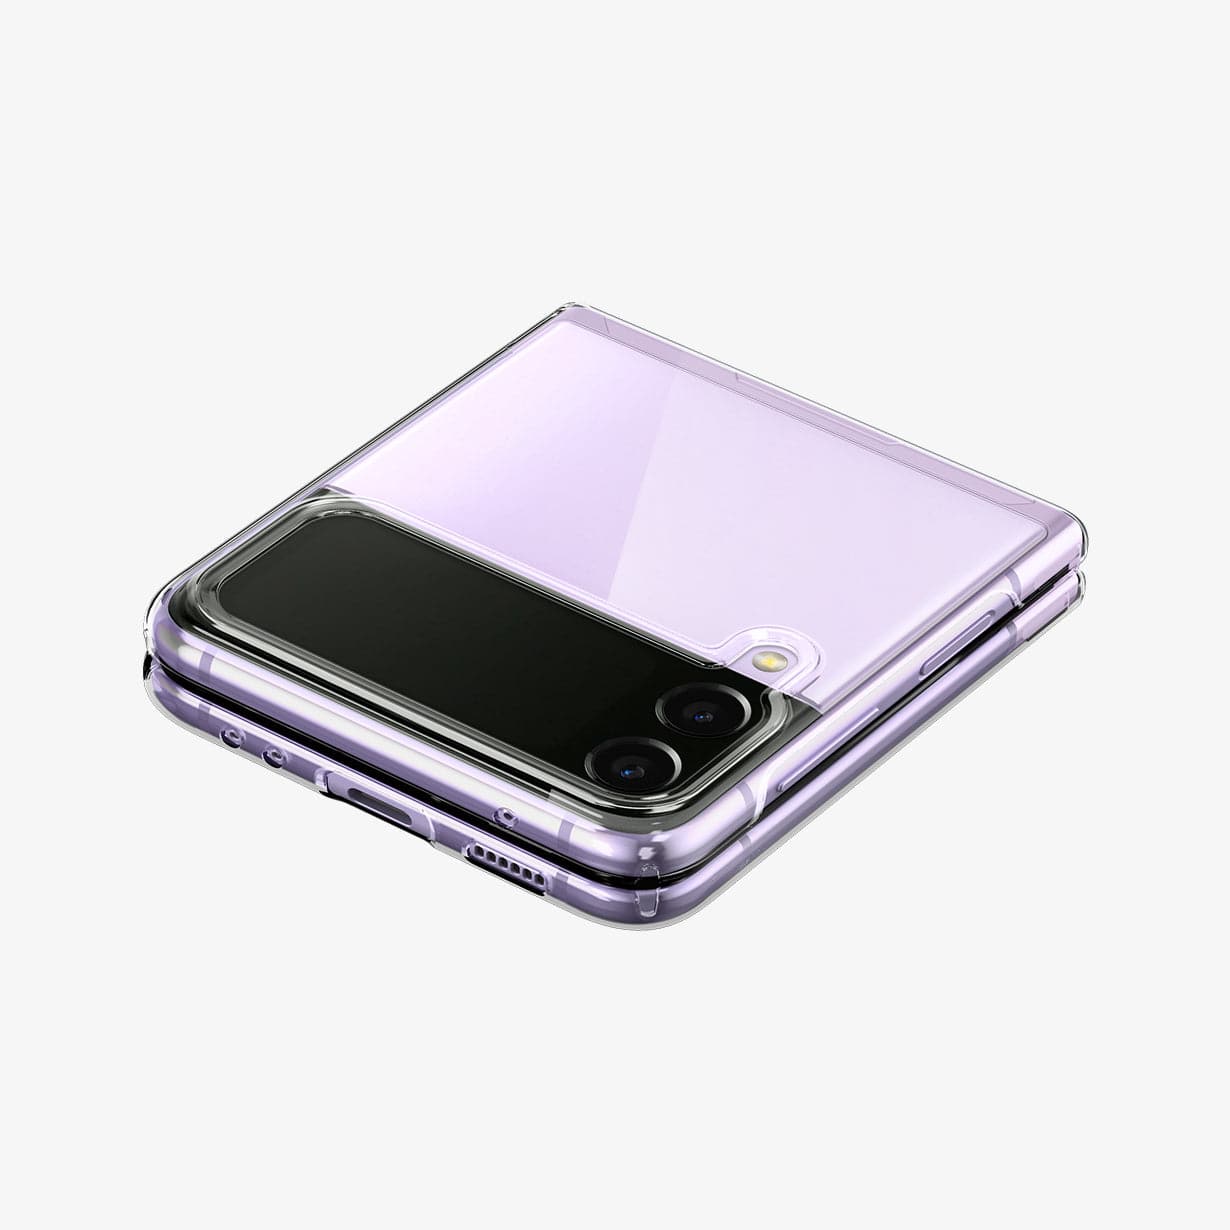 ACS03085 - Galaxy Z Flip 3 Case AirSkin in crystal clear showing the back, side, top and bottom with device fully closed